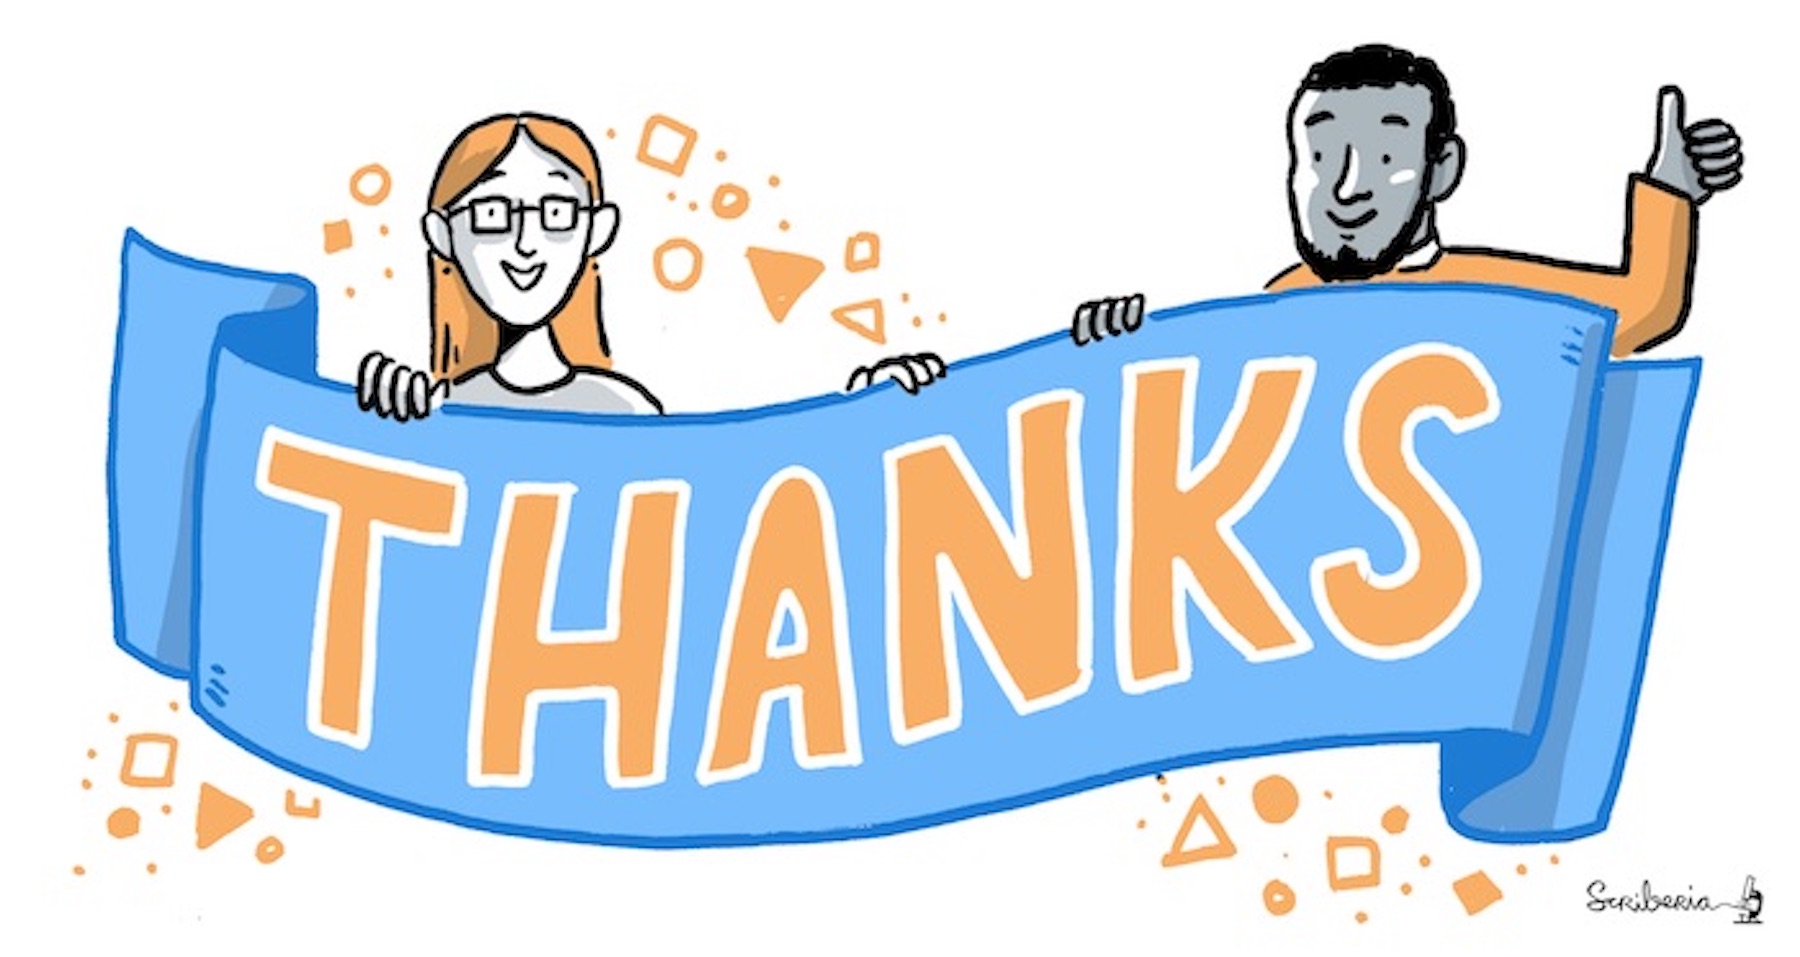 An illustration thanking those watching the presentation. Two people hold a fabric banner with the word 'thanks' written on it. The people are smiling and one is giving a thumbs-up